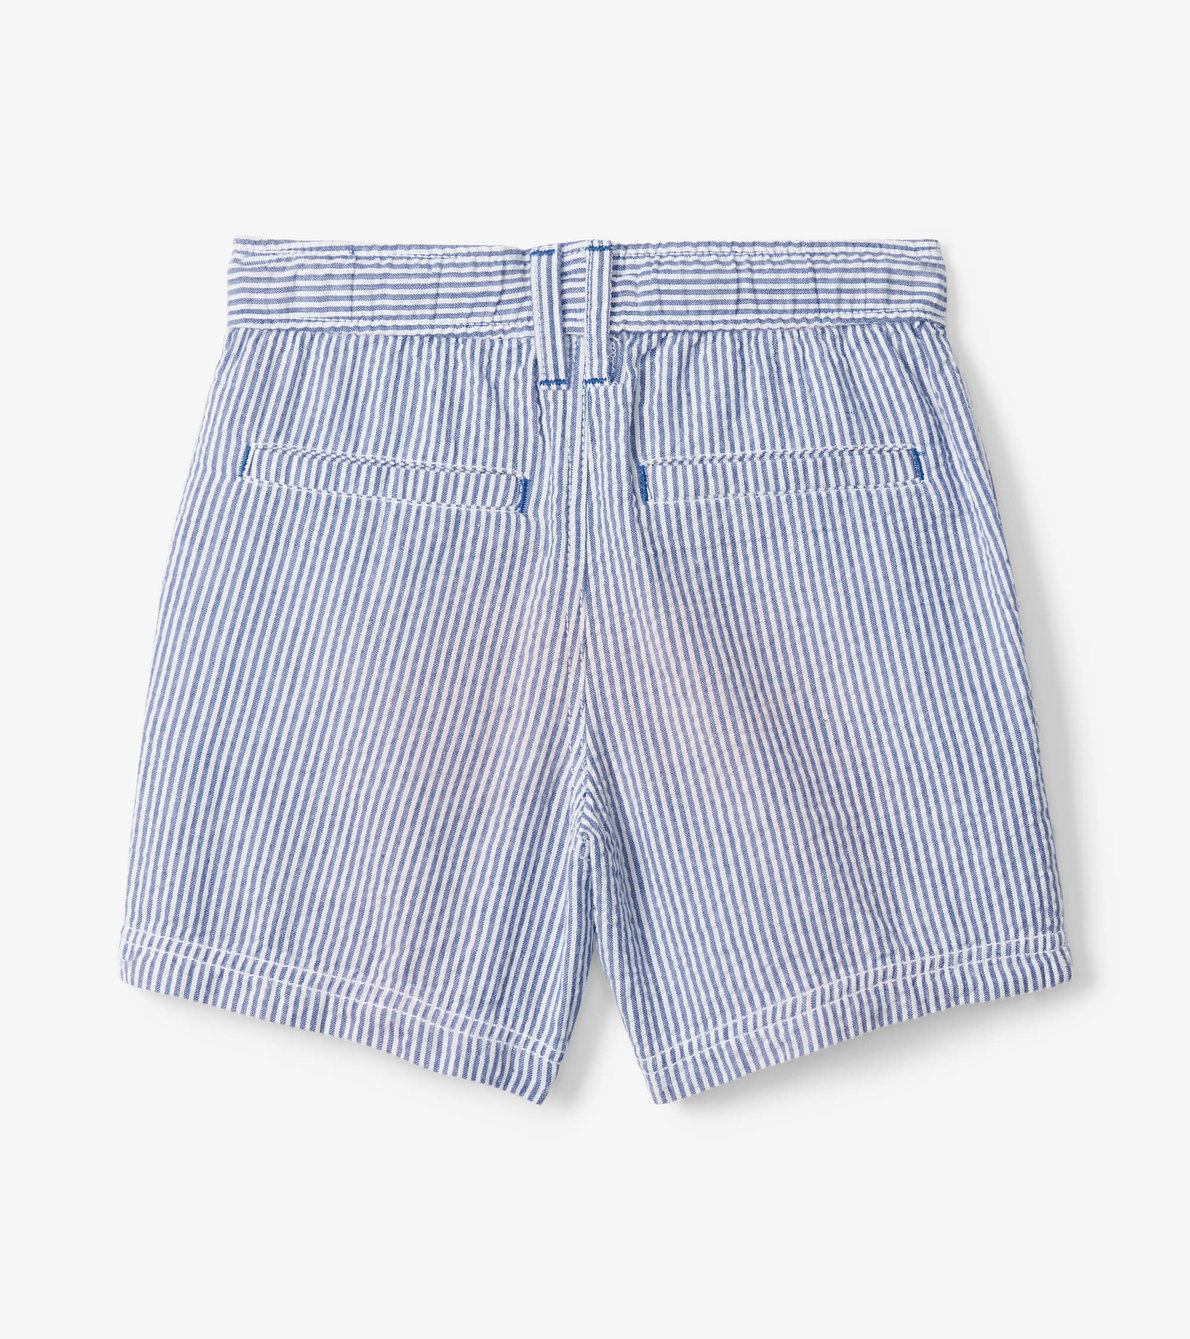 View larger image of Blue Stripes Woven Shorts